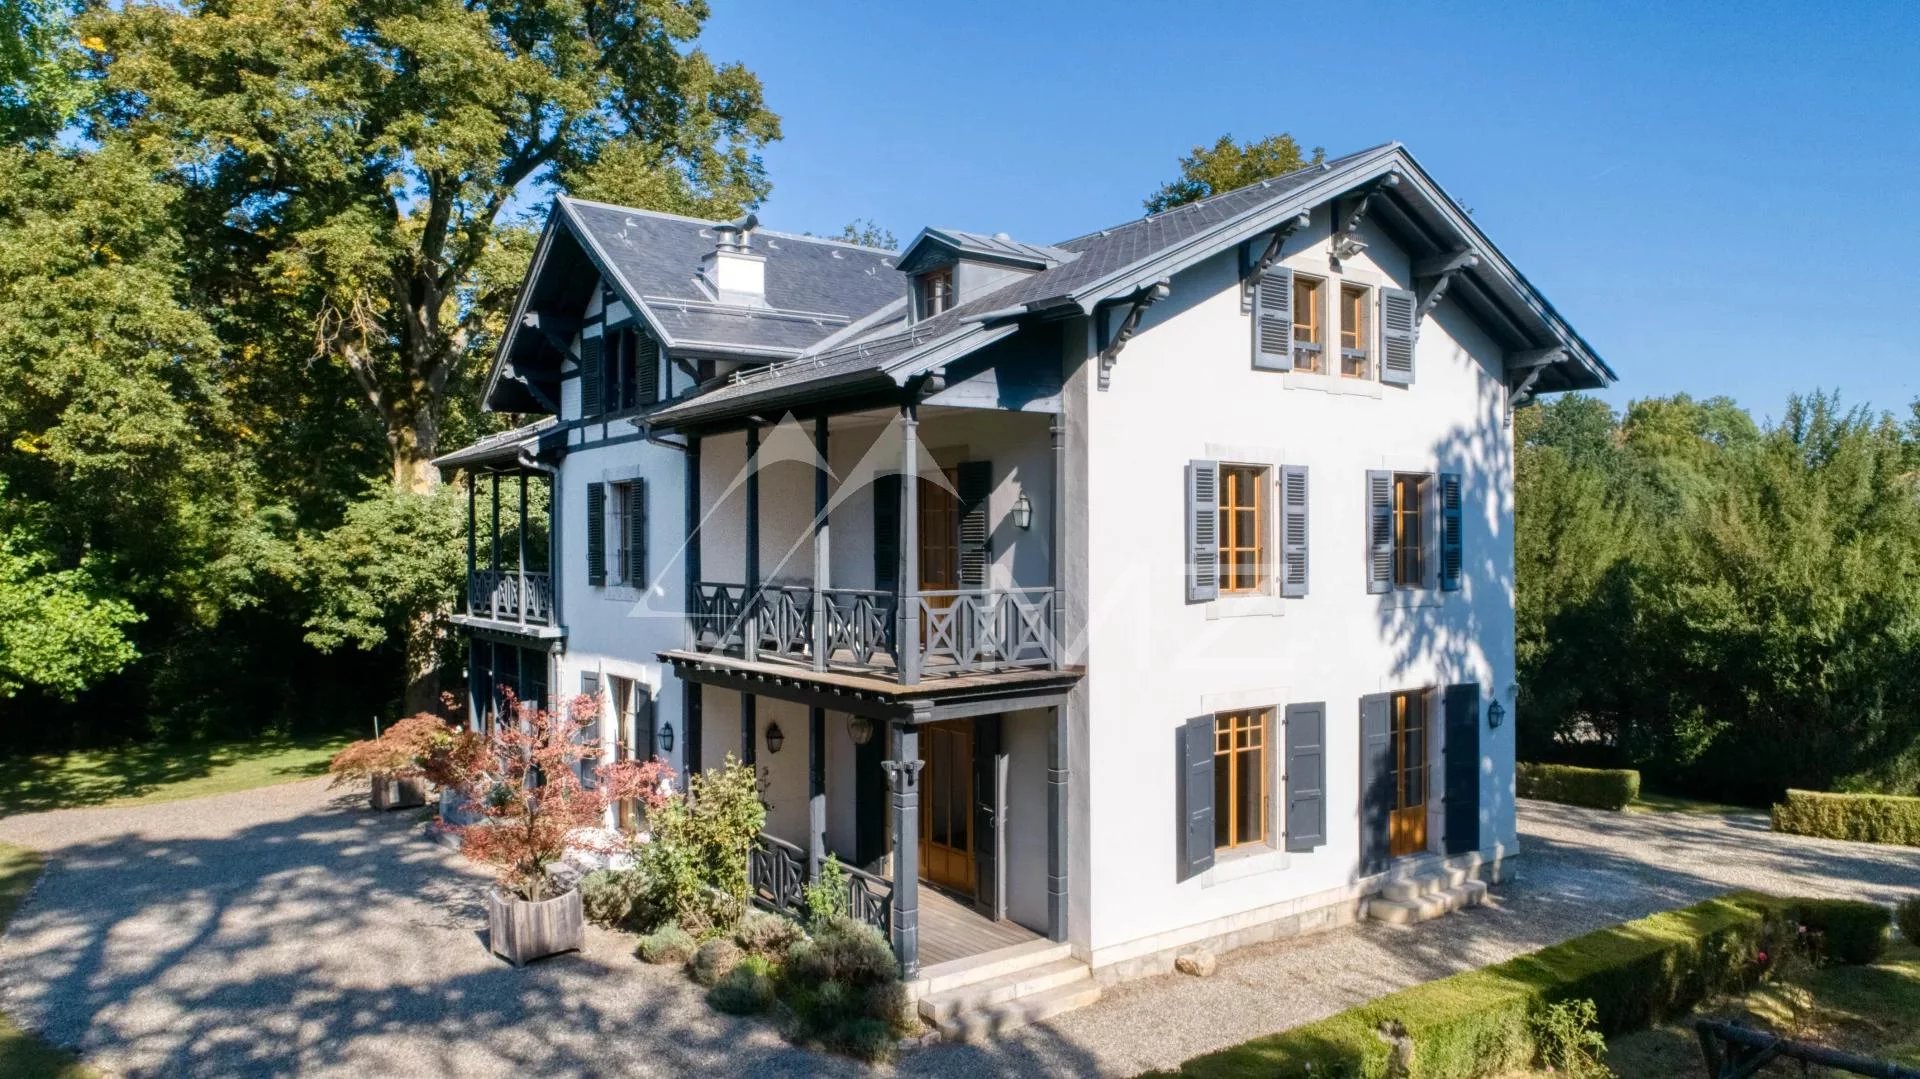 Geneva - Rhone Arve - Fine residence with character